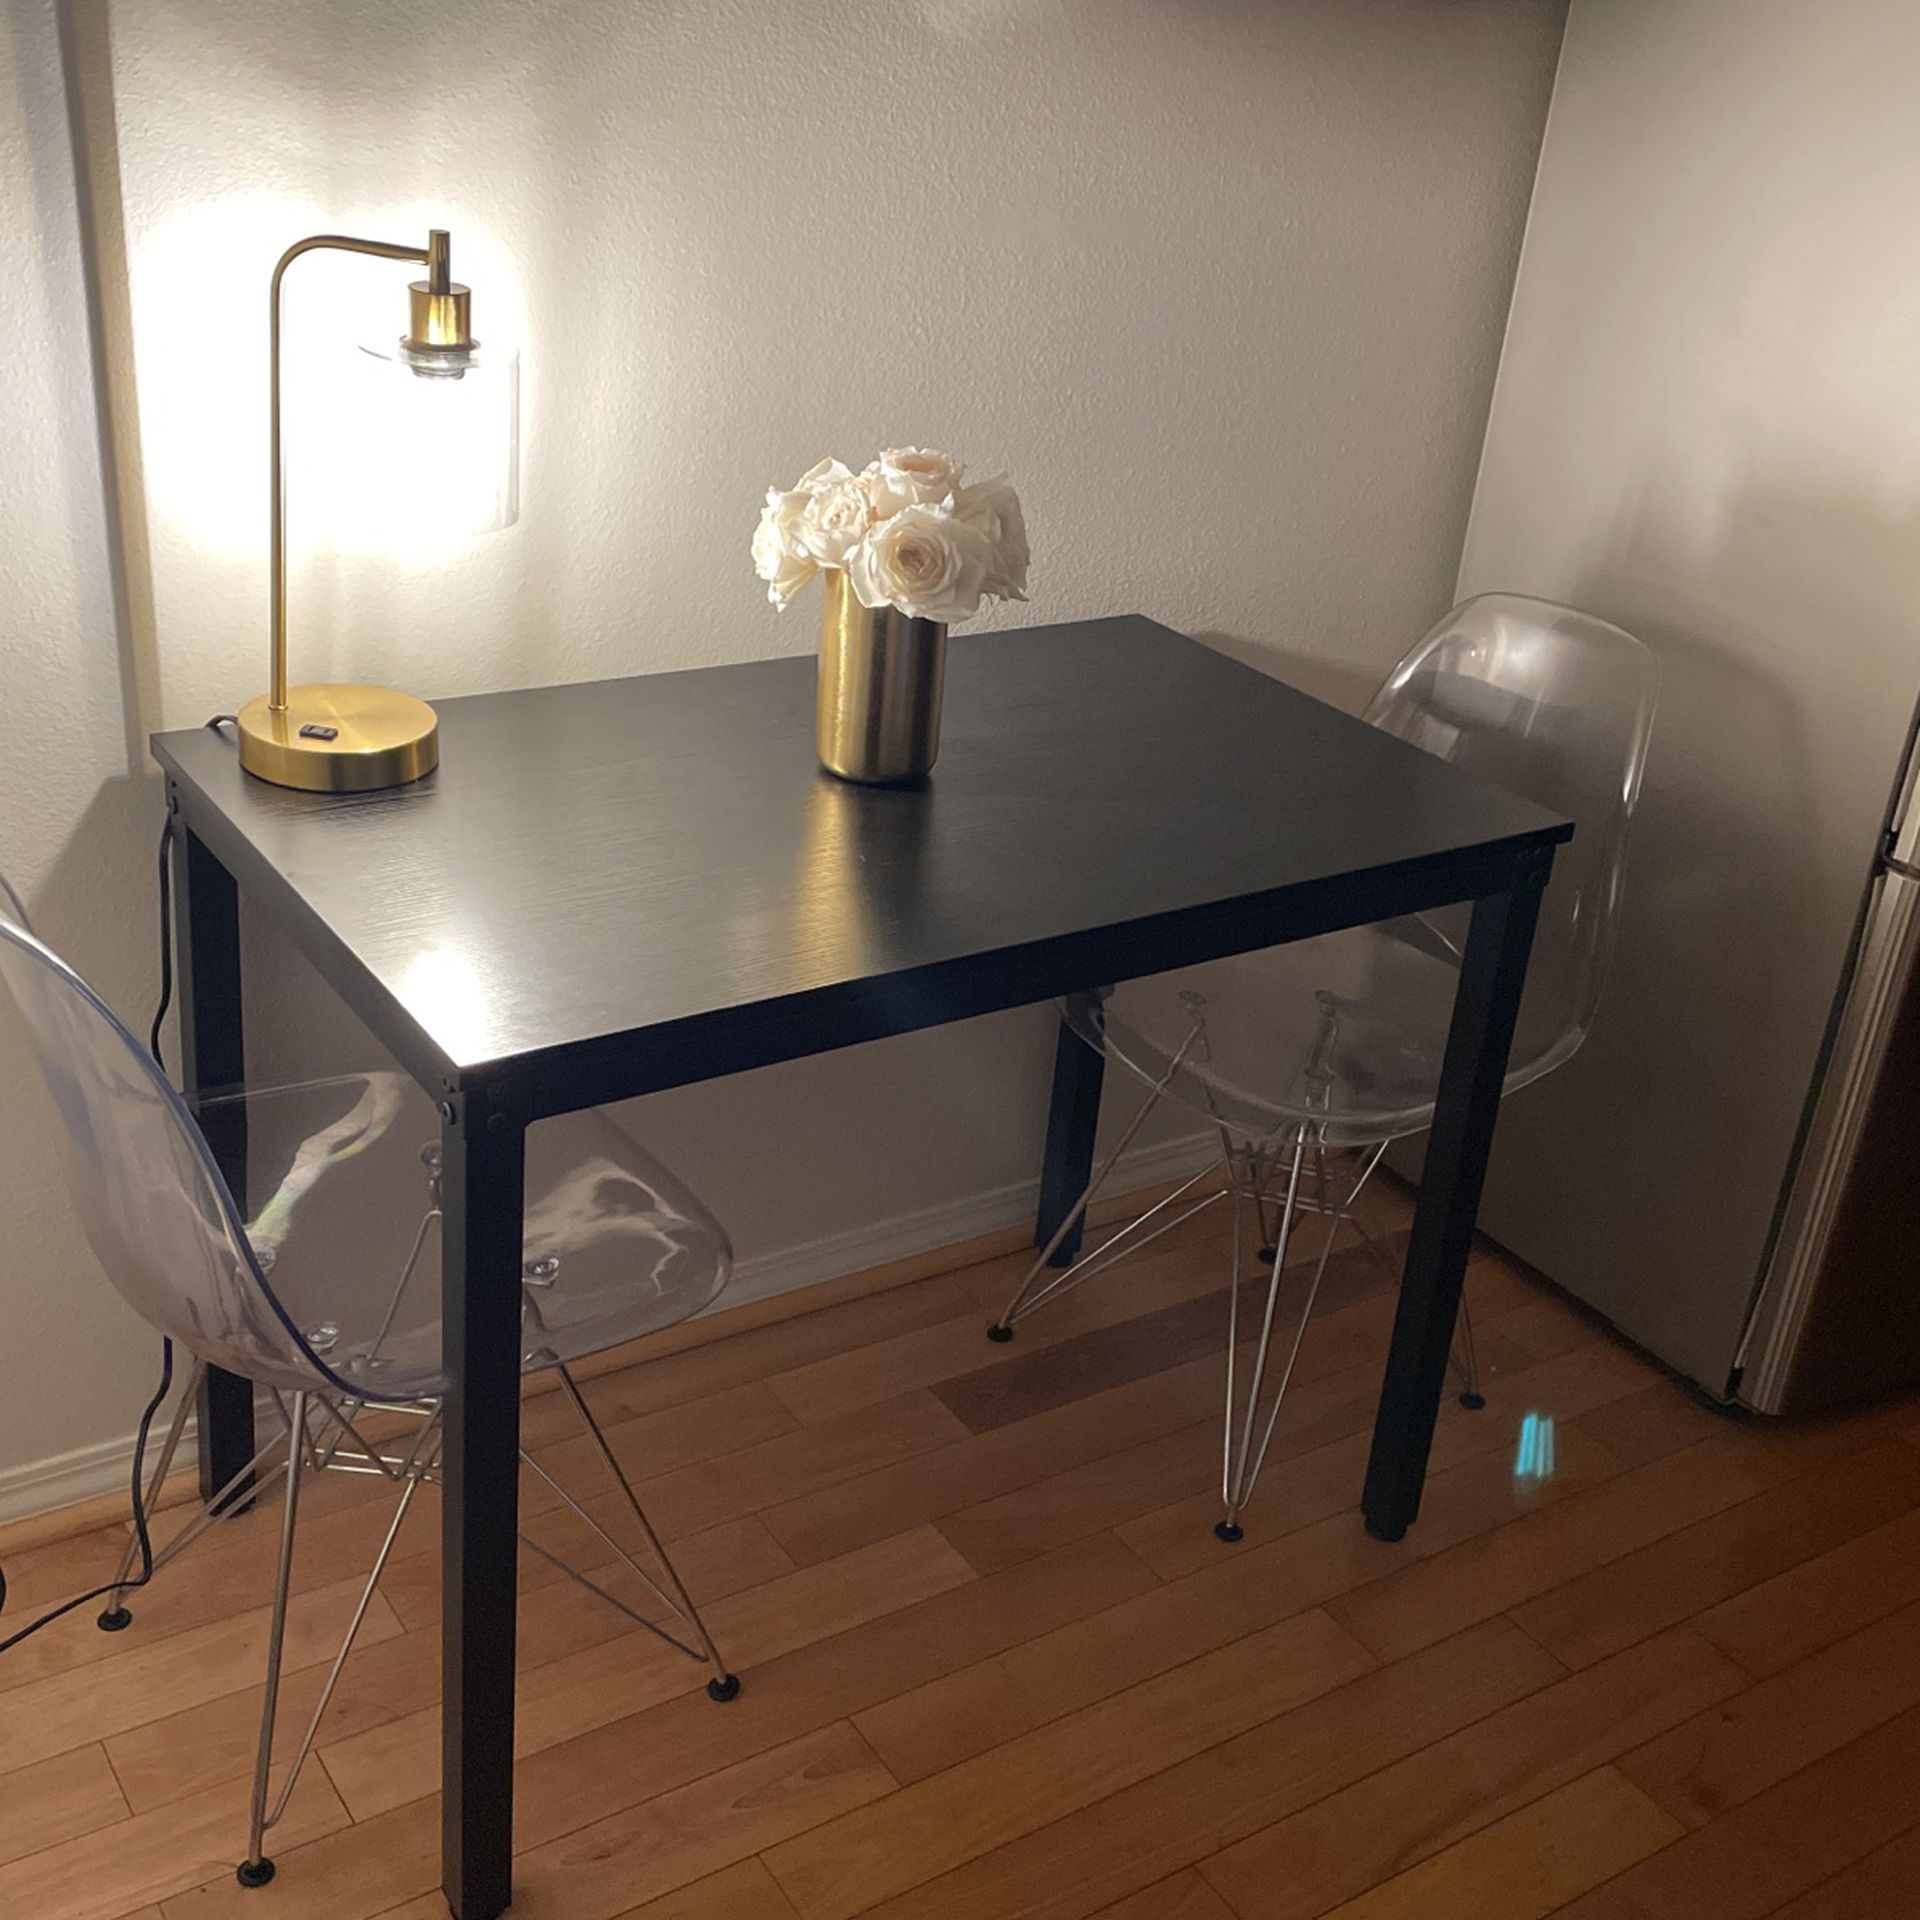 Brand New Black Dining Table For Small Apartment Or Kitchen.